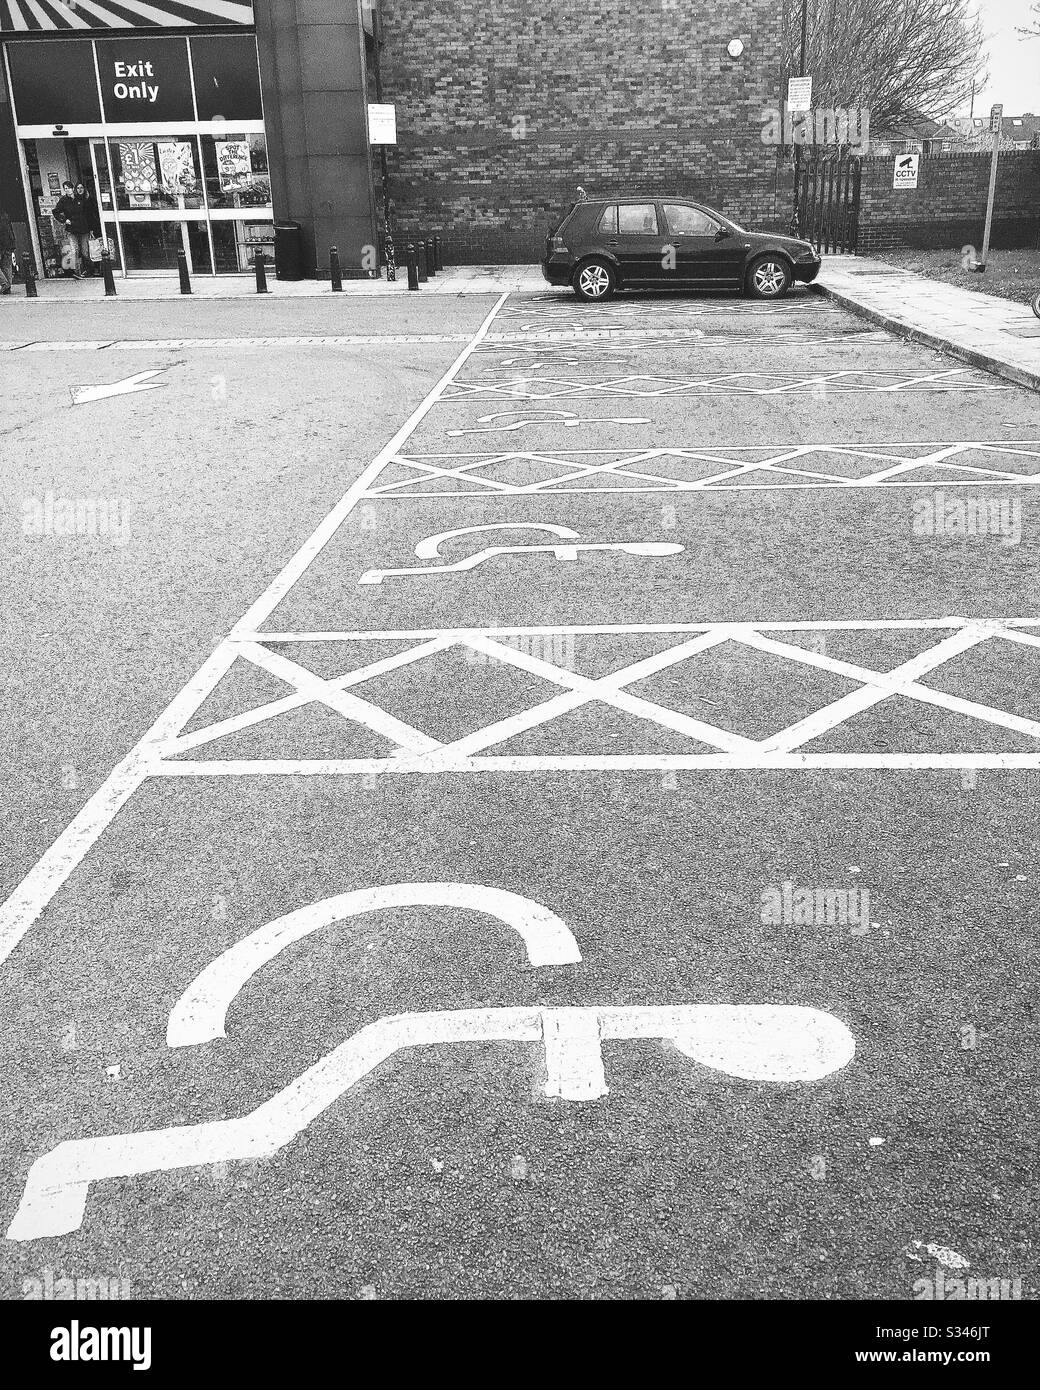 Disabled parking spaces in a car park, outside shops in England, UK Stock Photo